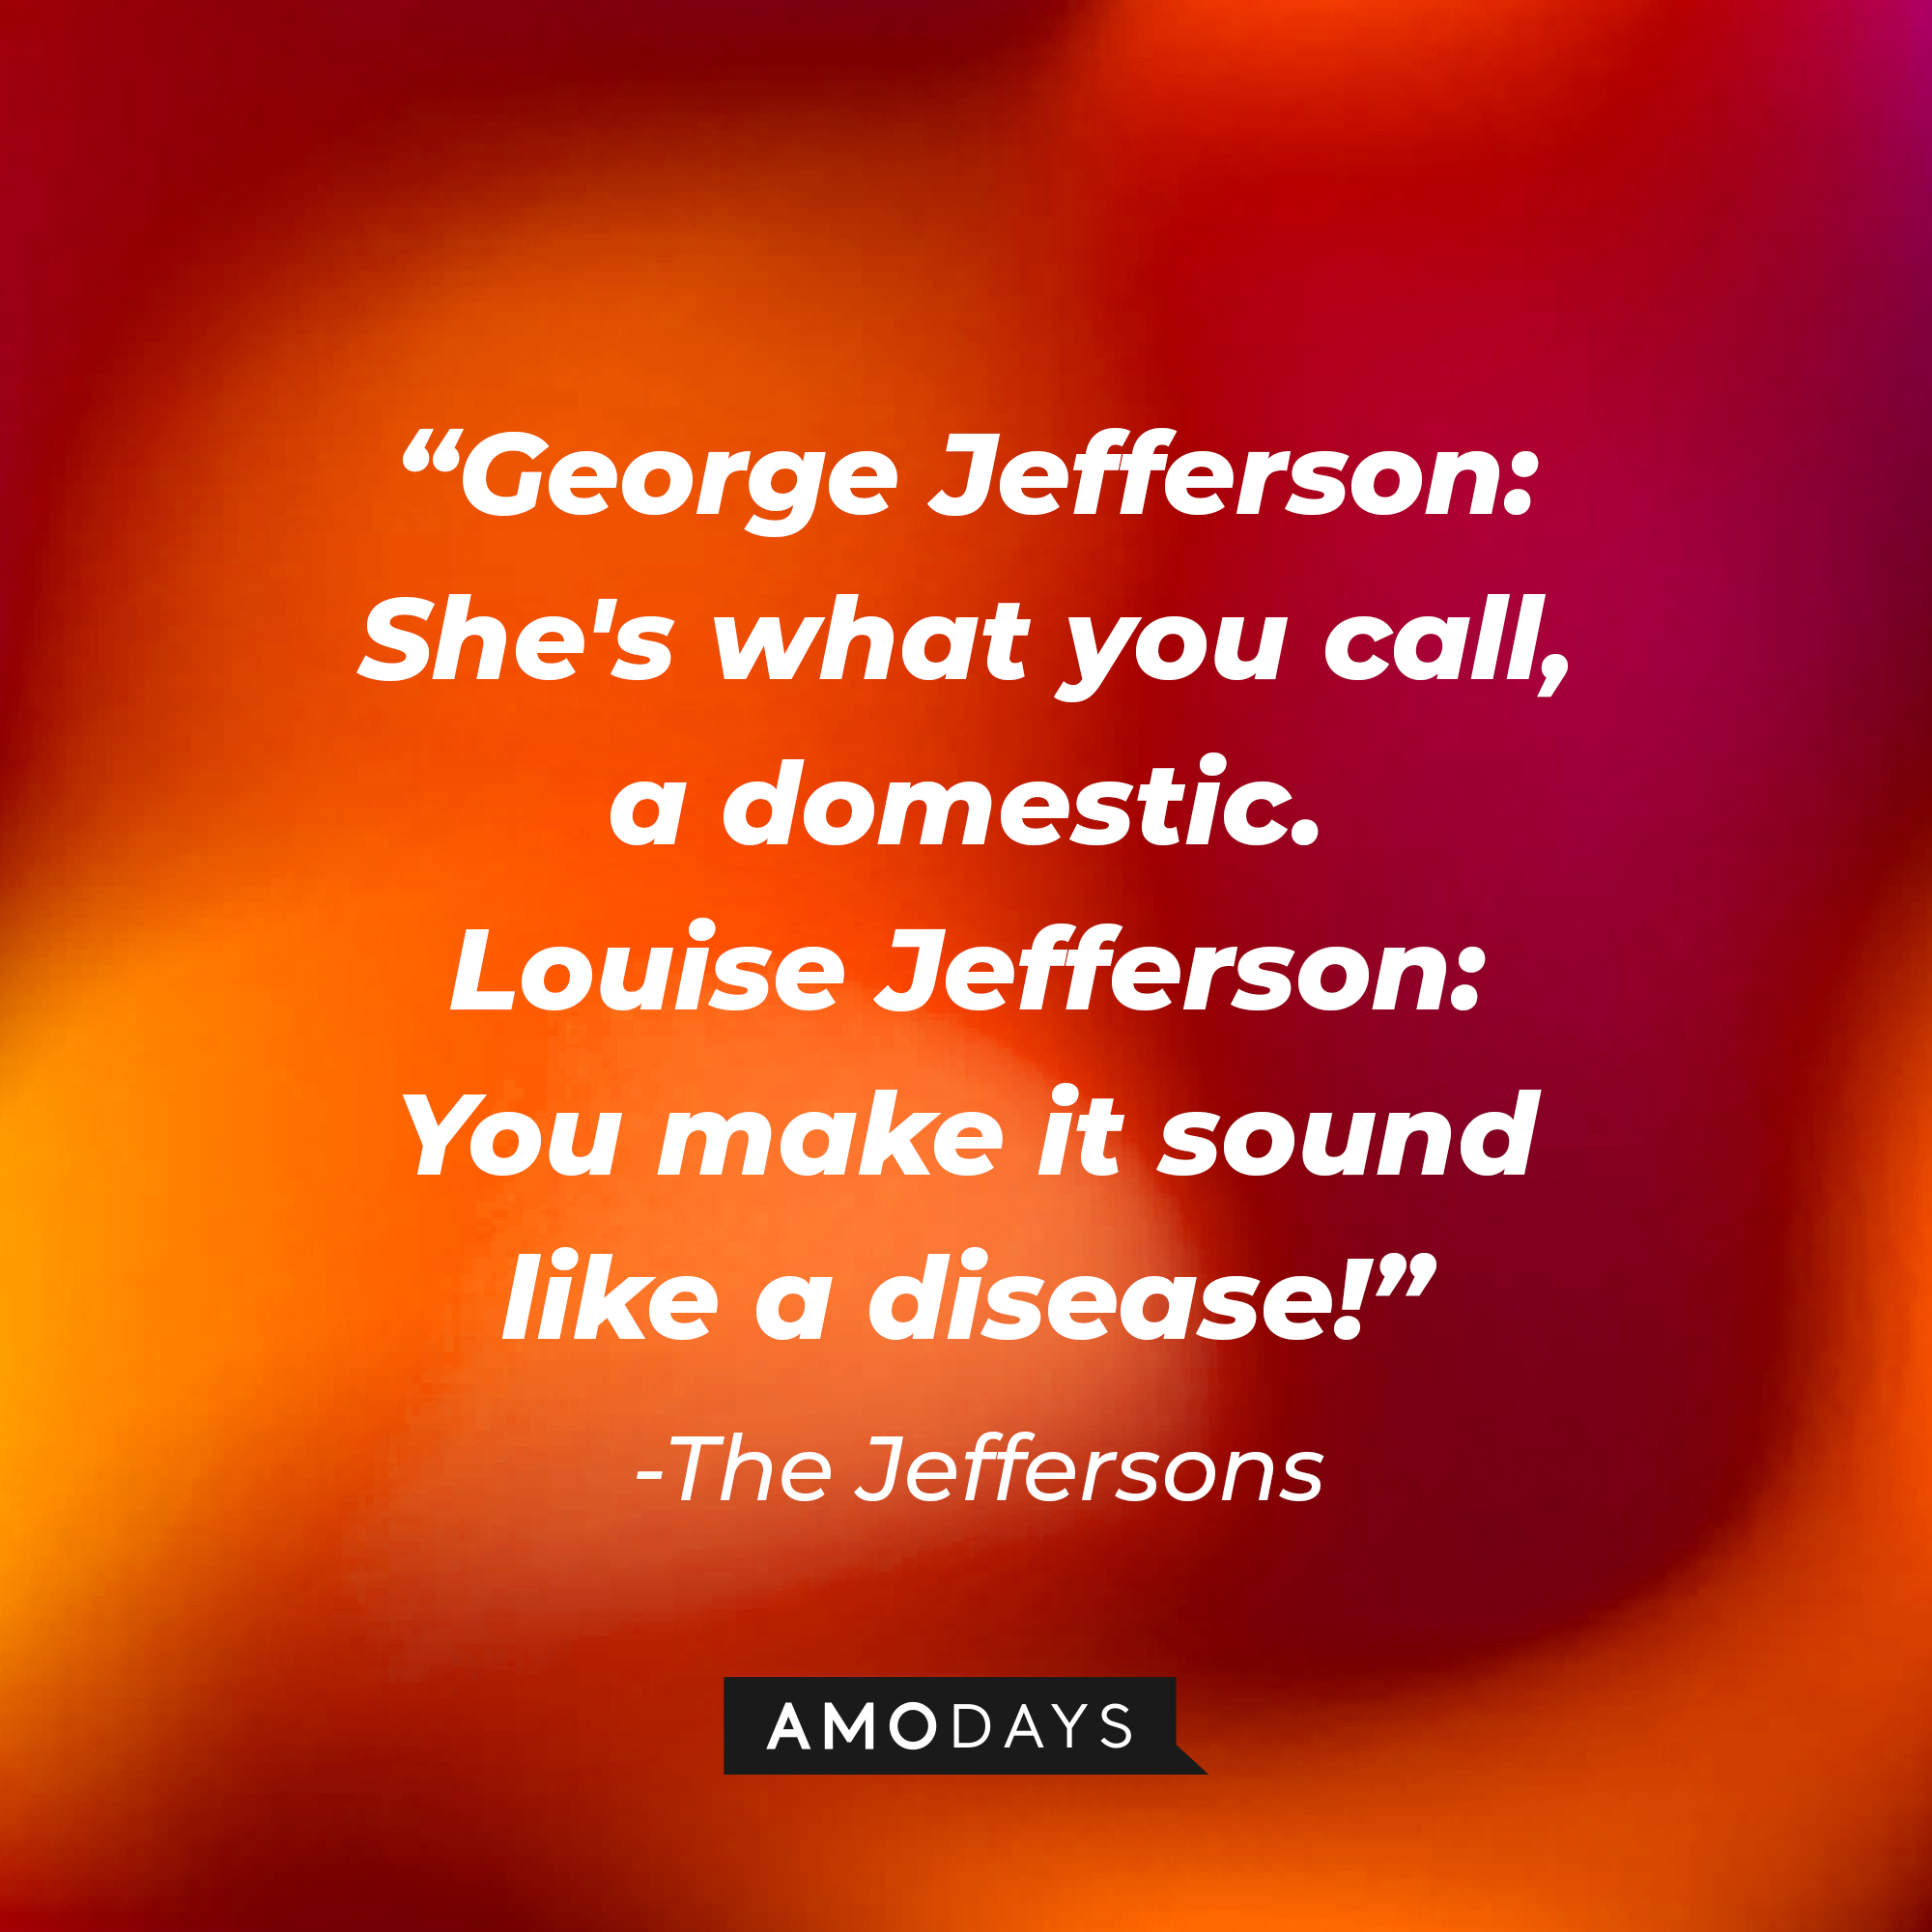 Quote from "The Jeffersons": "George Jefferson: She's what you call, a domestic. Louise Jefferson: You make it sound like a disease!" | Source: AmoDays